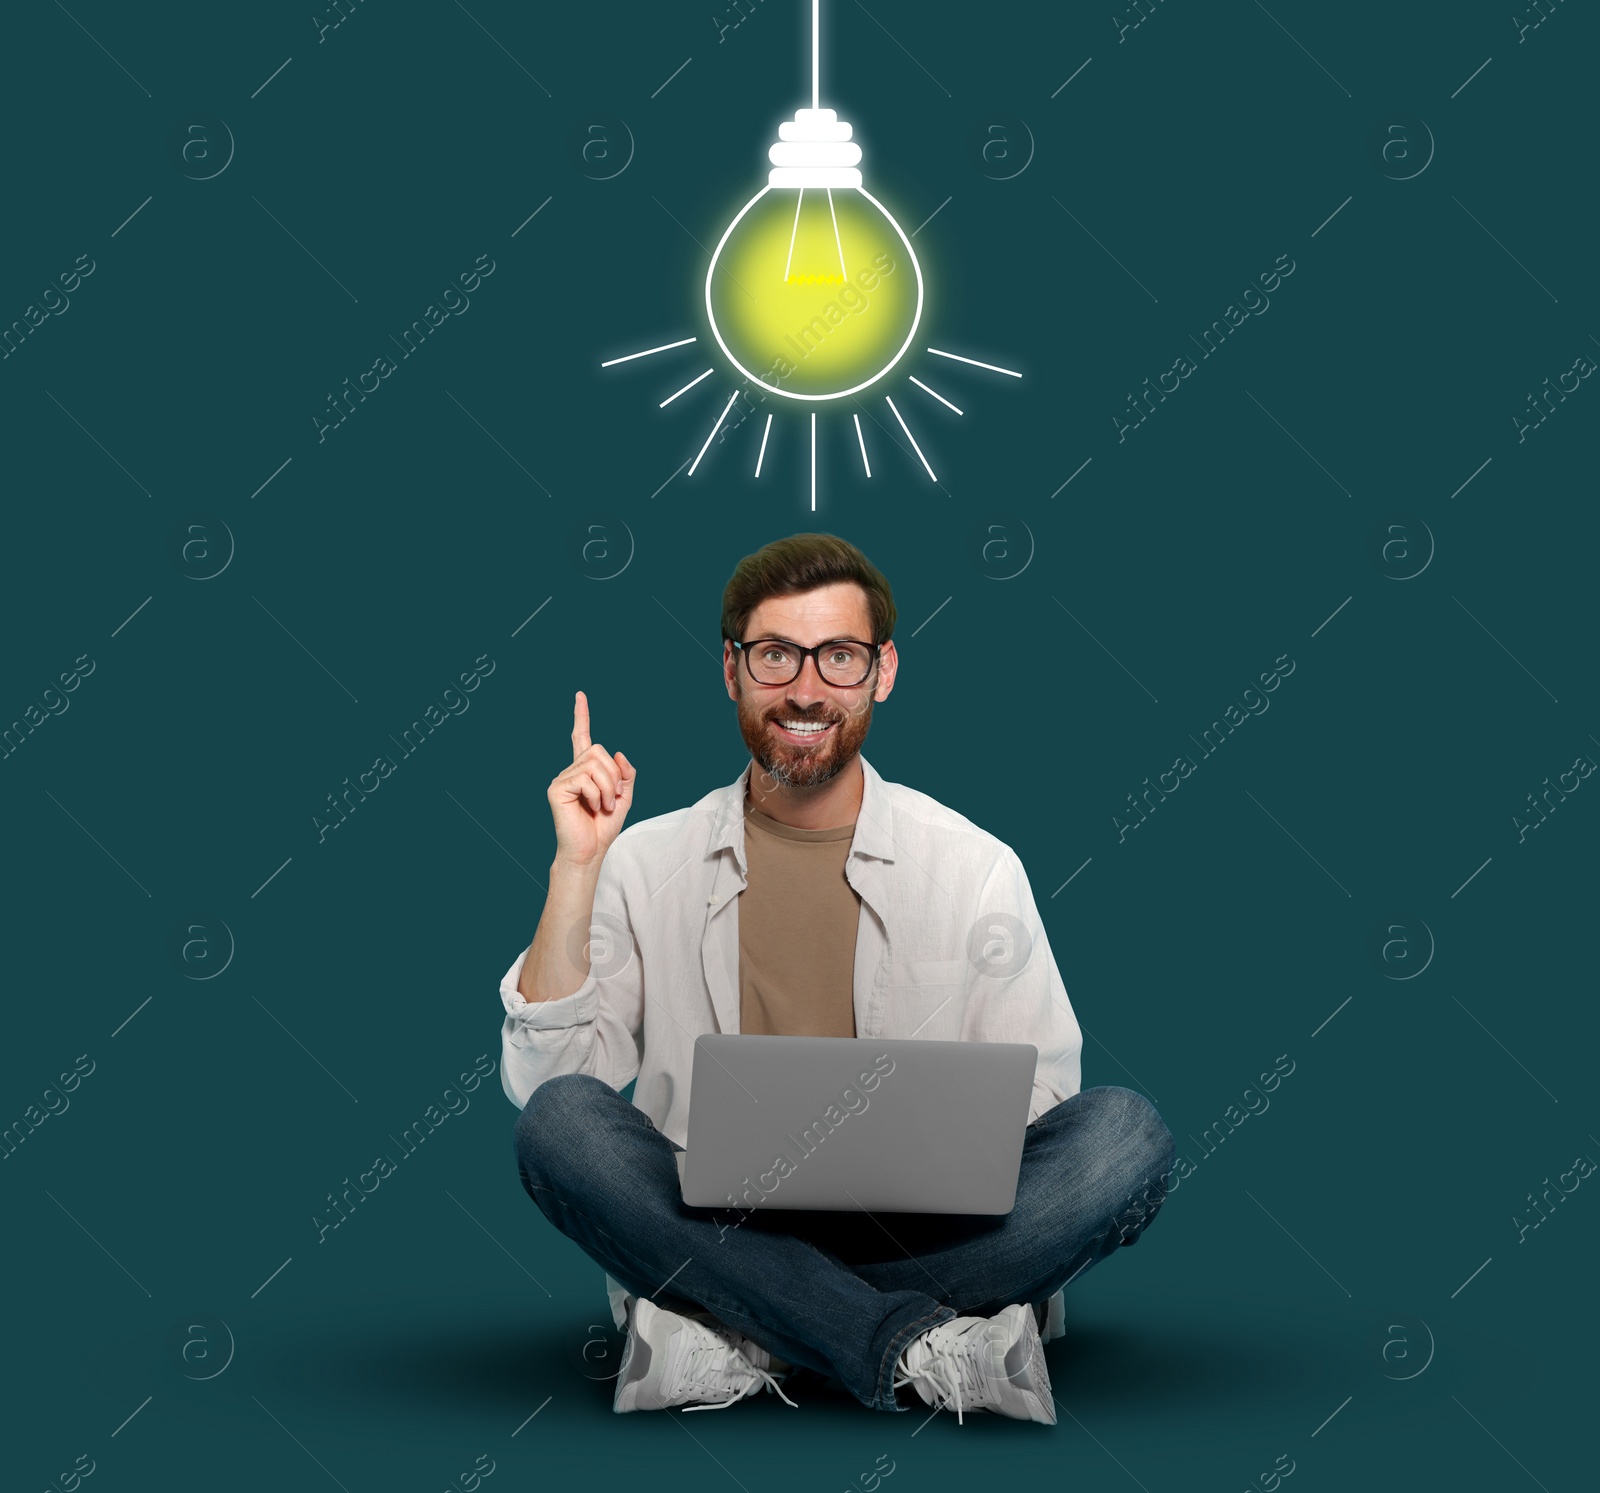 Image of Idea generation. Man with laptop on teal background. Illustration of glowing lamp light over him